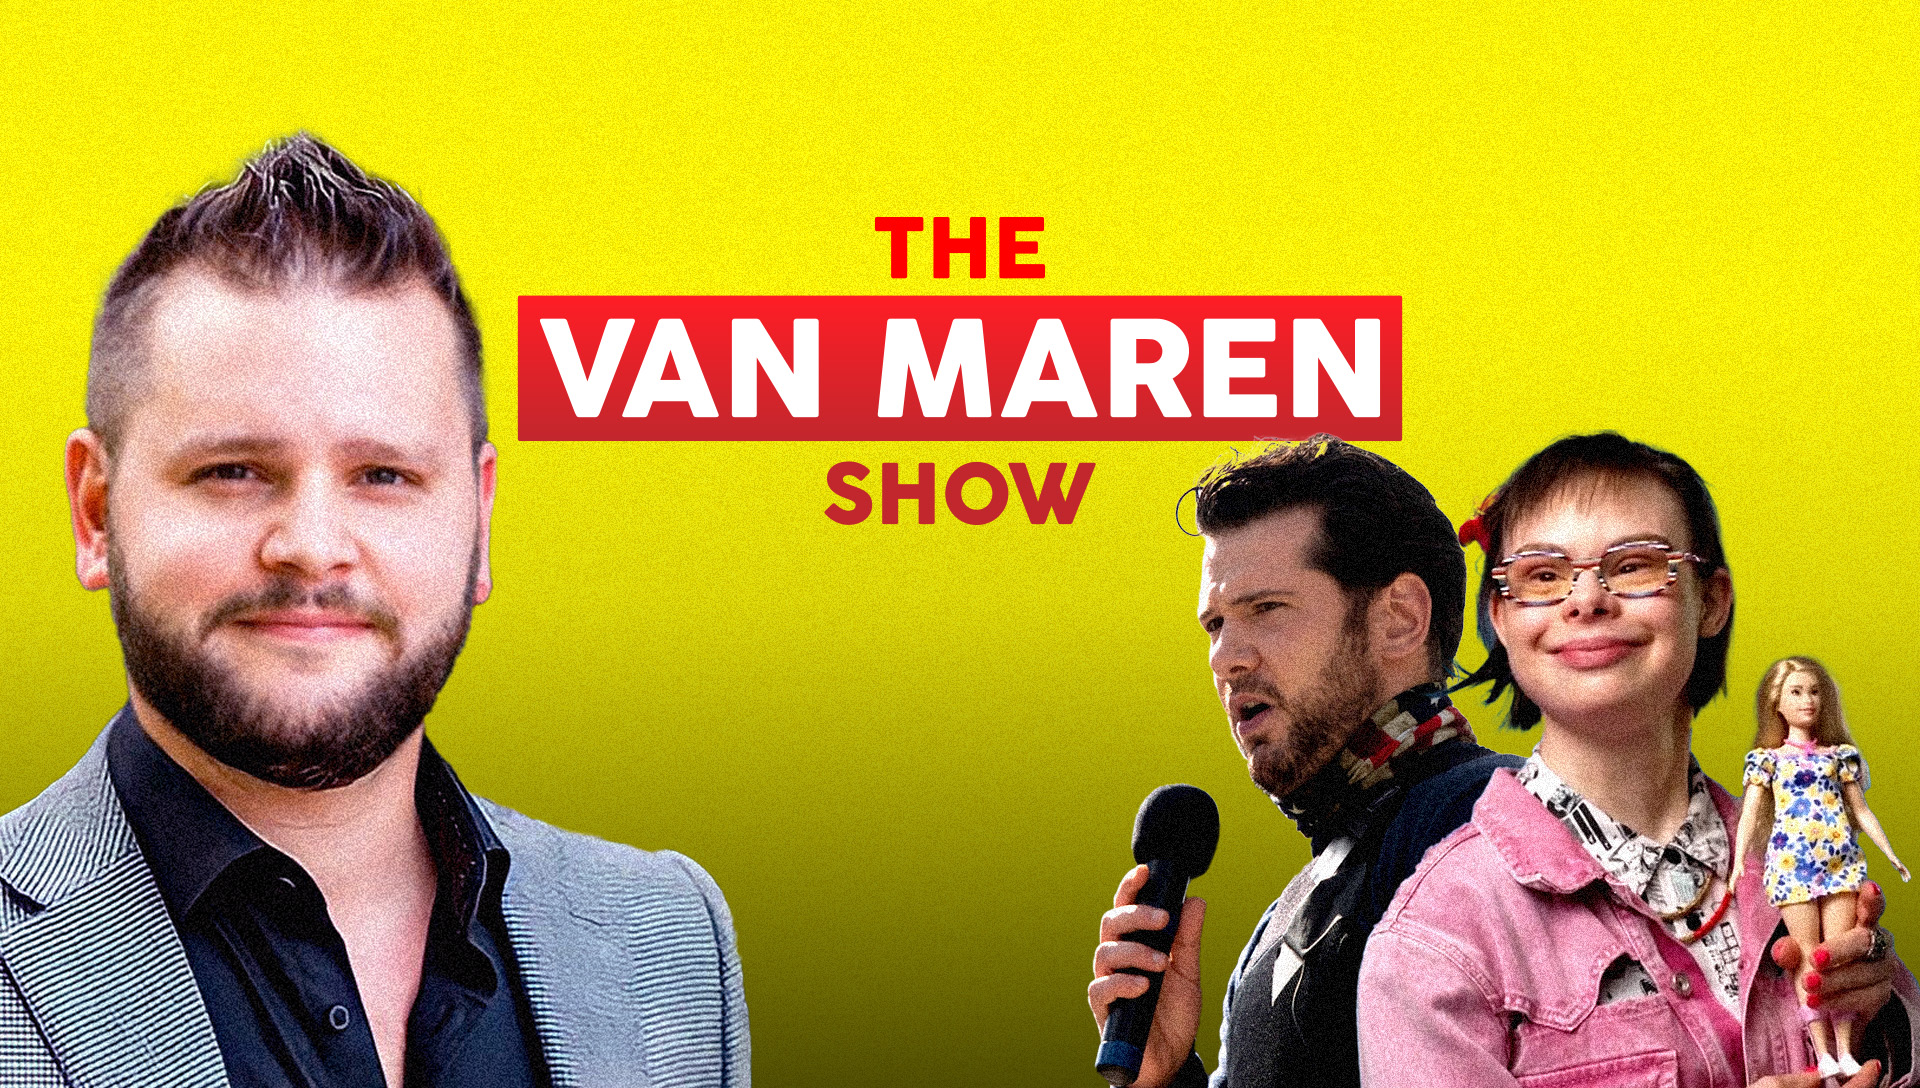 The Van Maren Show Episode 213: Steven Crowder's disgusting attack on the Down syndrome community